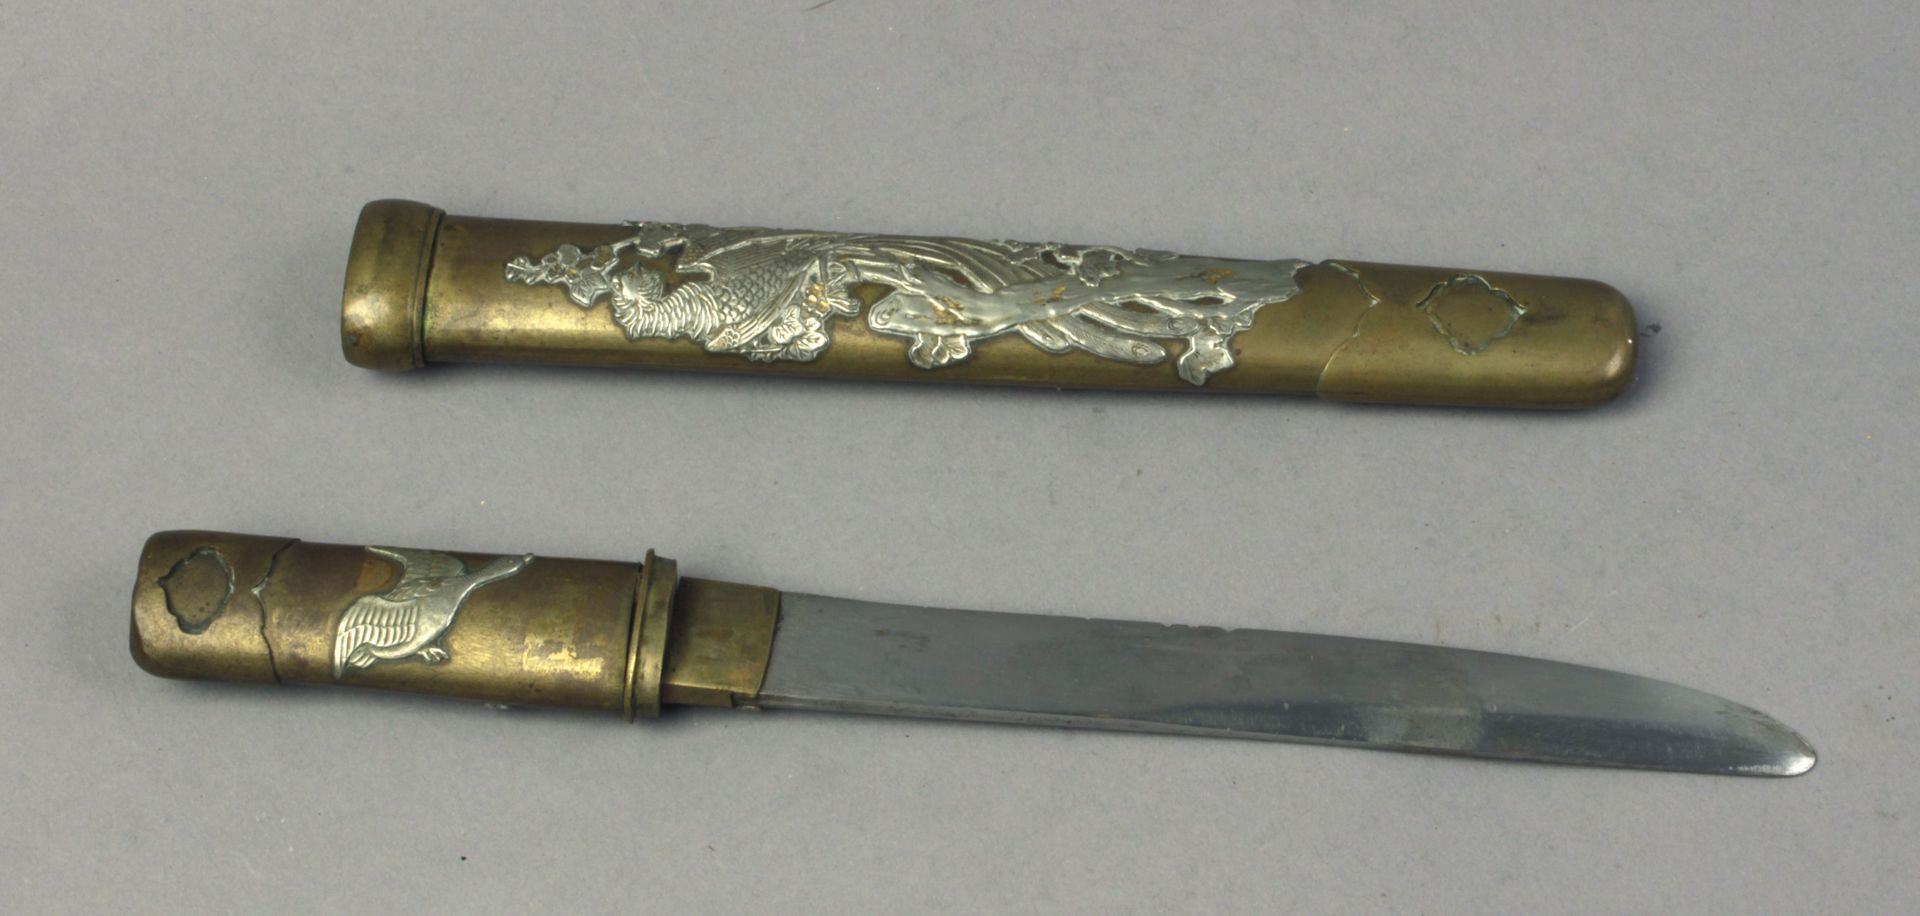 A 20th century Chinese knife